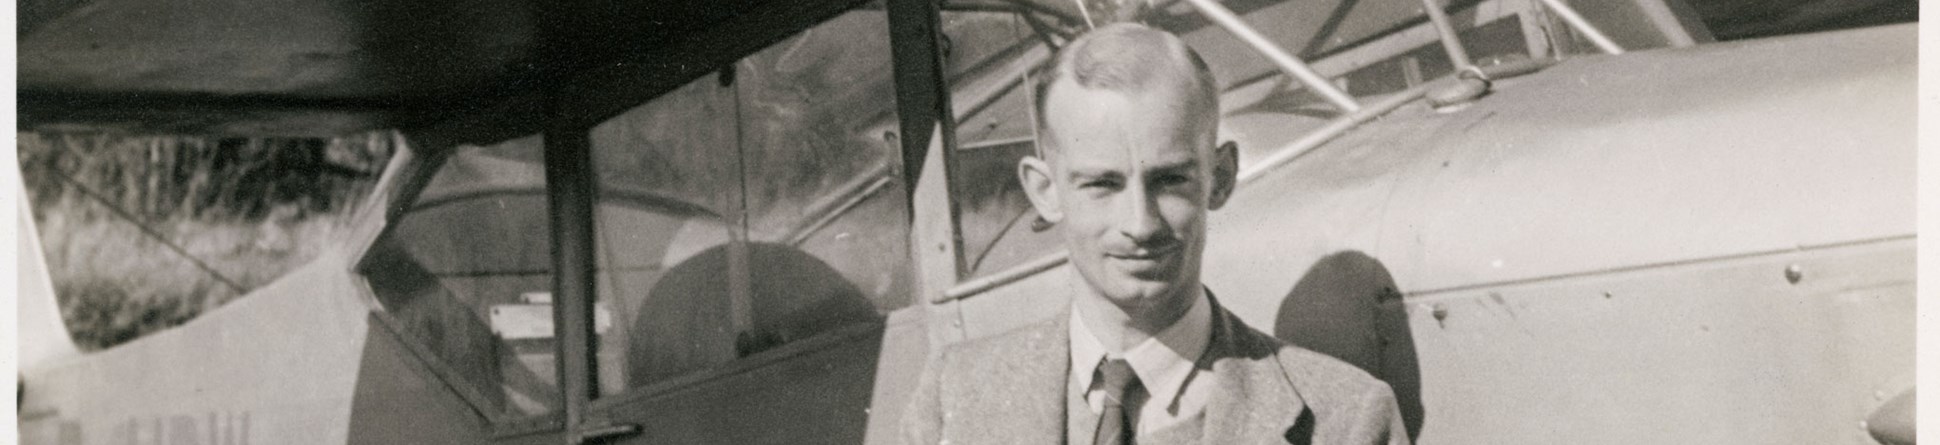 A photograph of Harold Wingham as a young man, posed in front of light aircraft. Pinned to his tie is a badge or medallion featuring a winged motif.